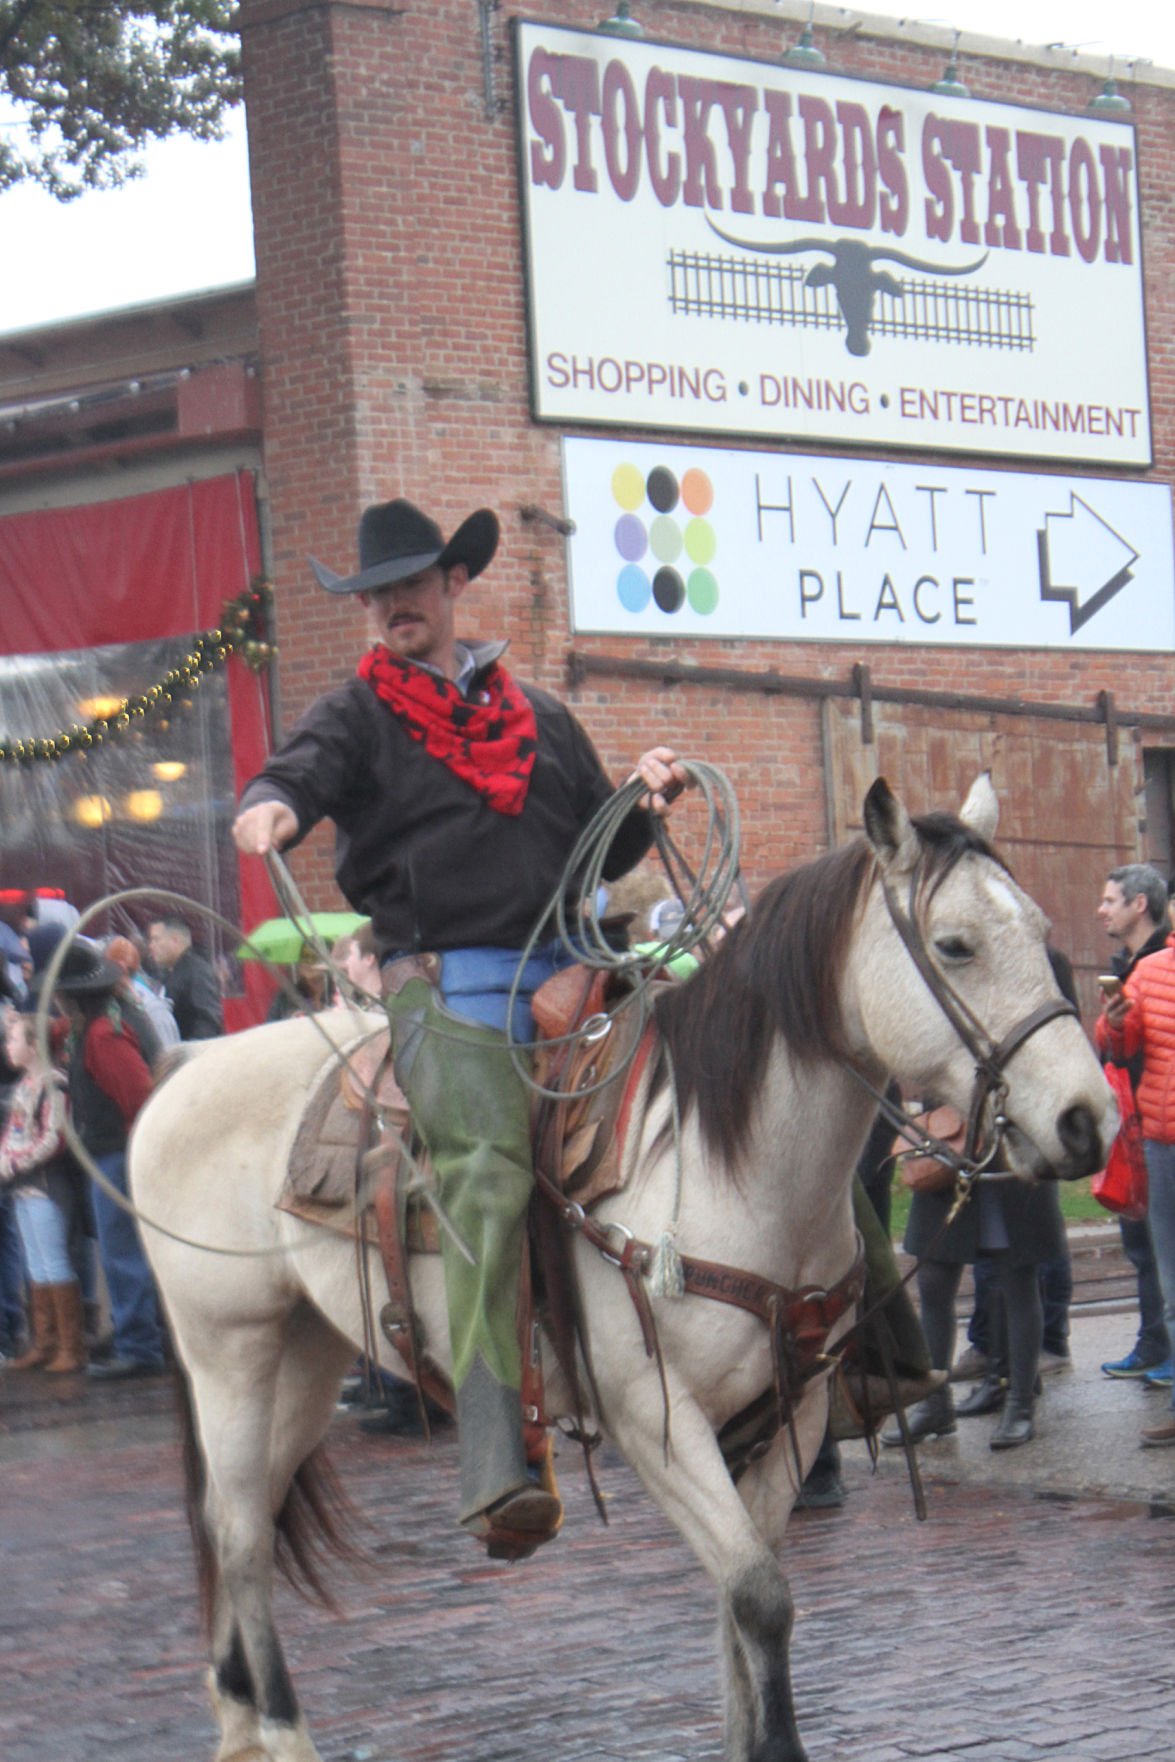 Christmas in the Stockyards attracts all ages to participate in holiday